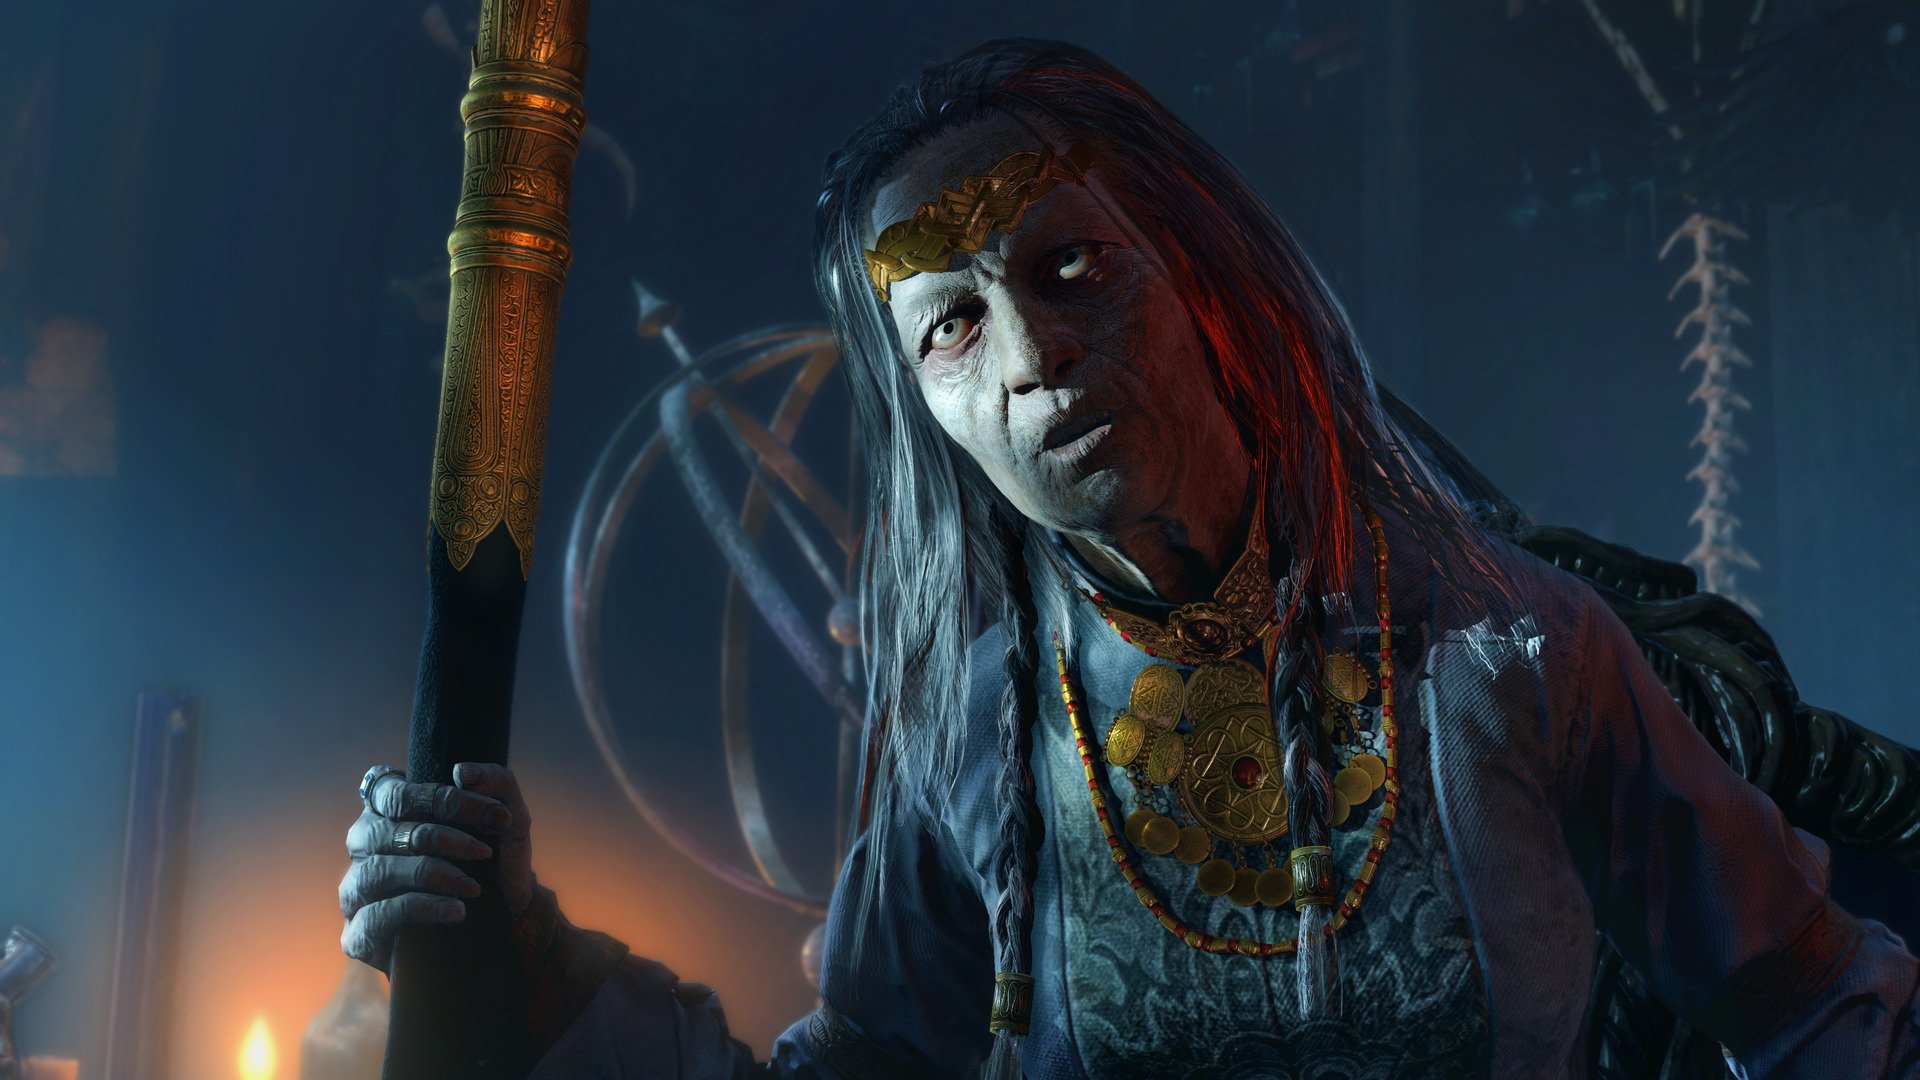 Does 'Middle-earth: Shadow of Mordor' live up to the hype?